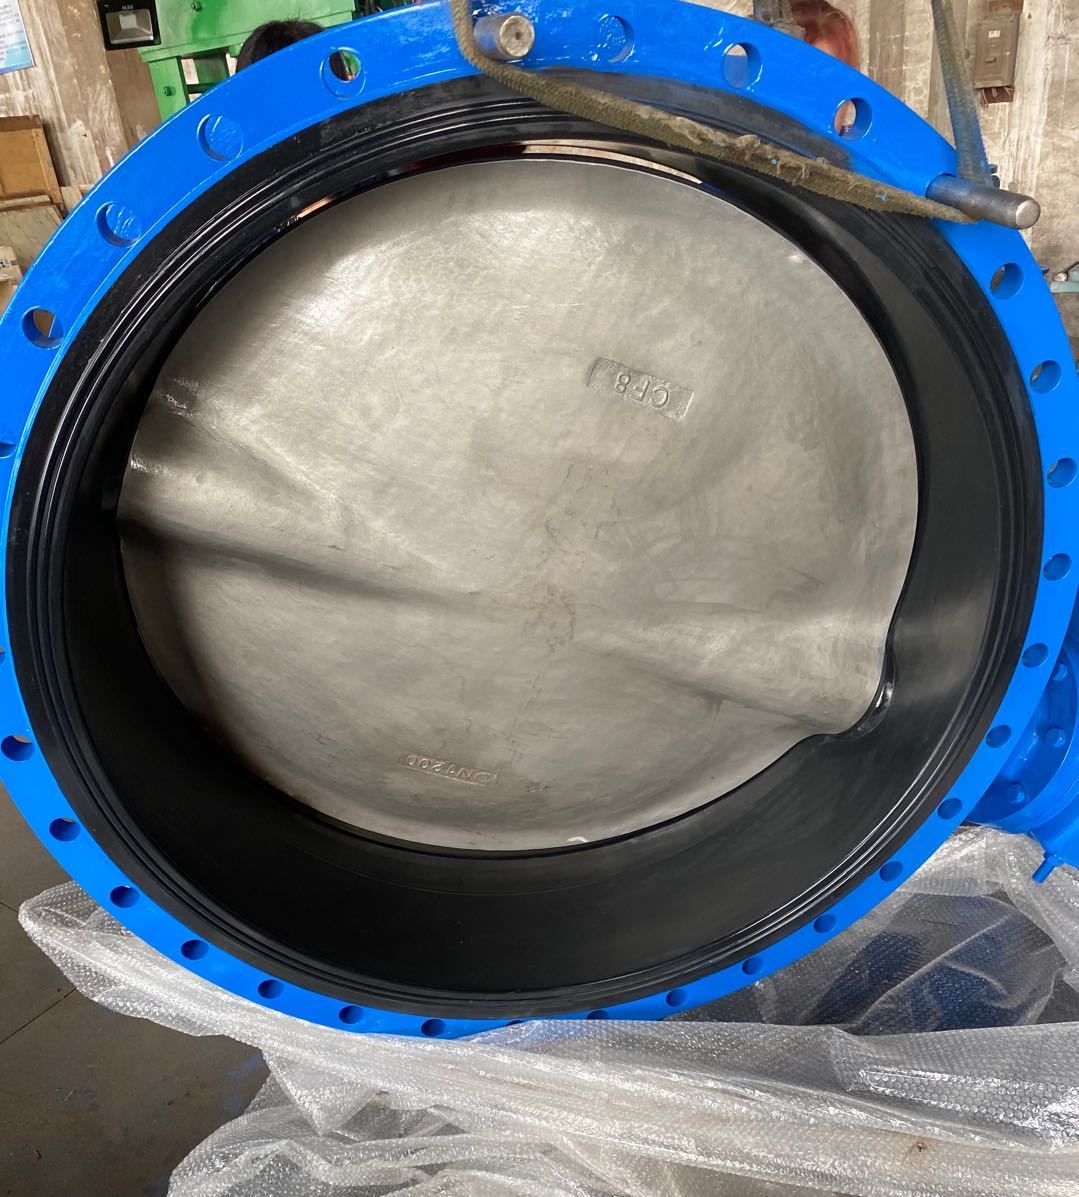 What is the maximum size of the company's butterfly valve?